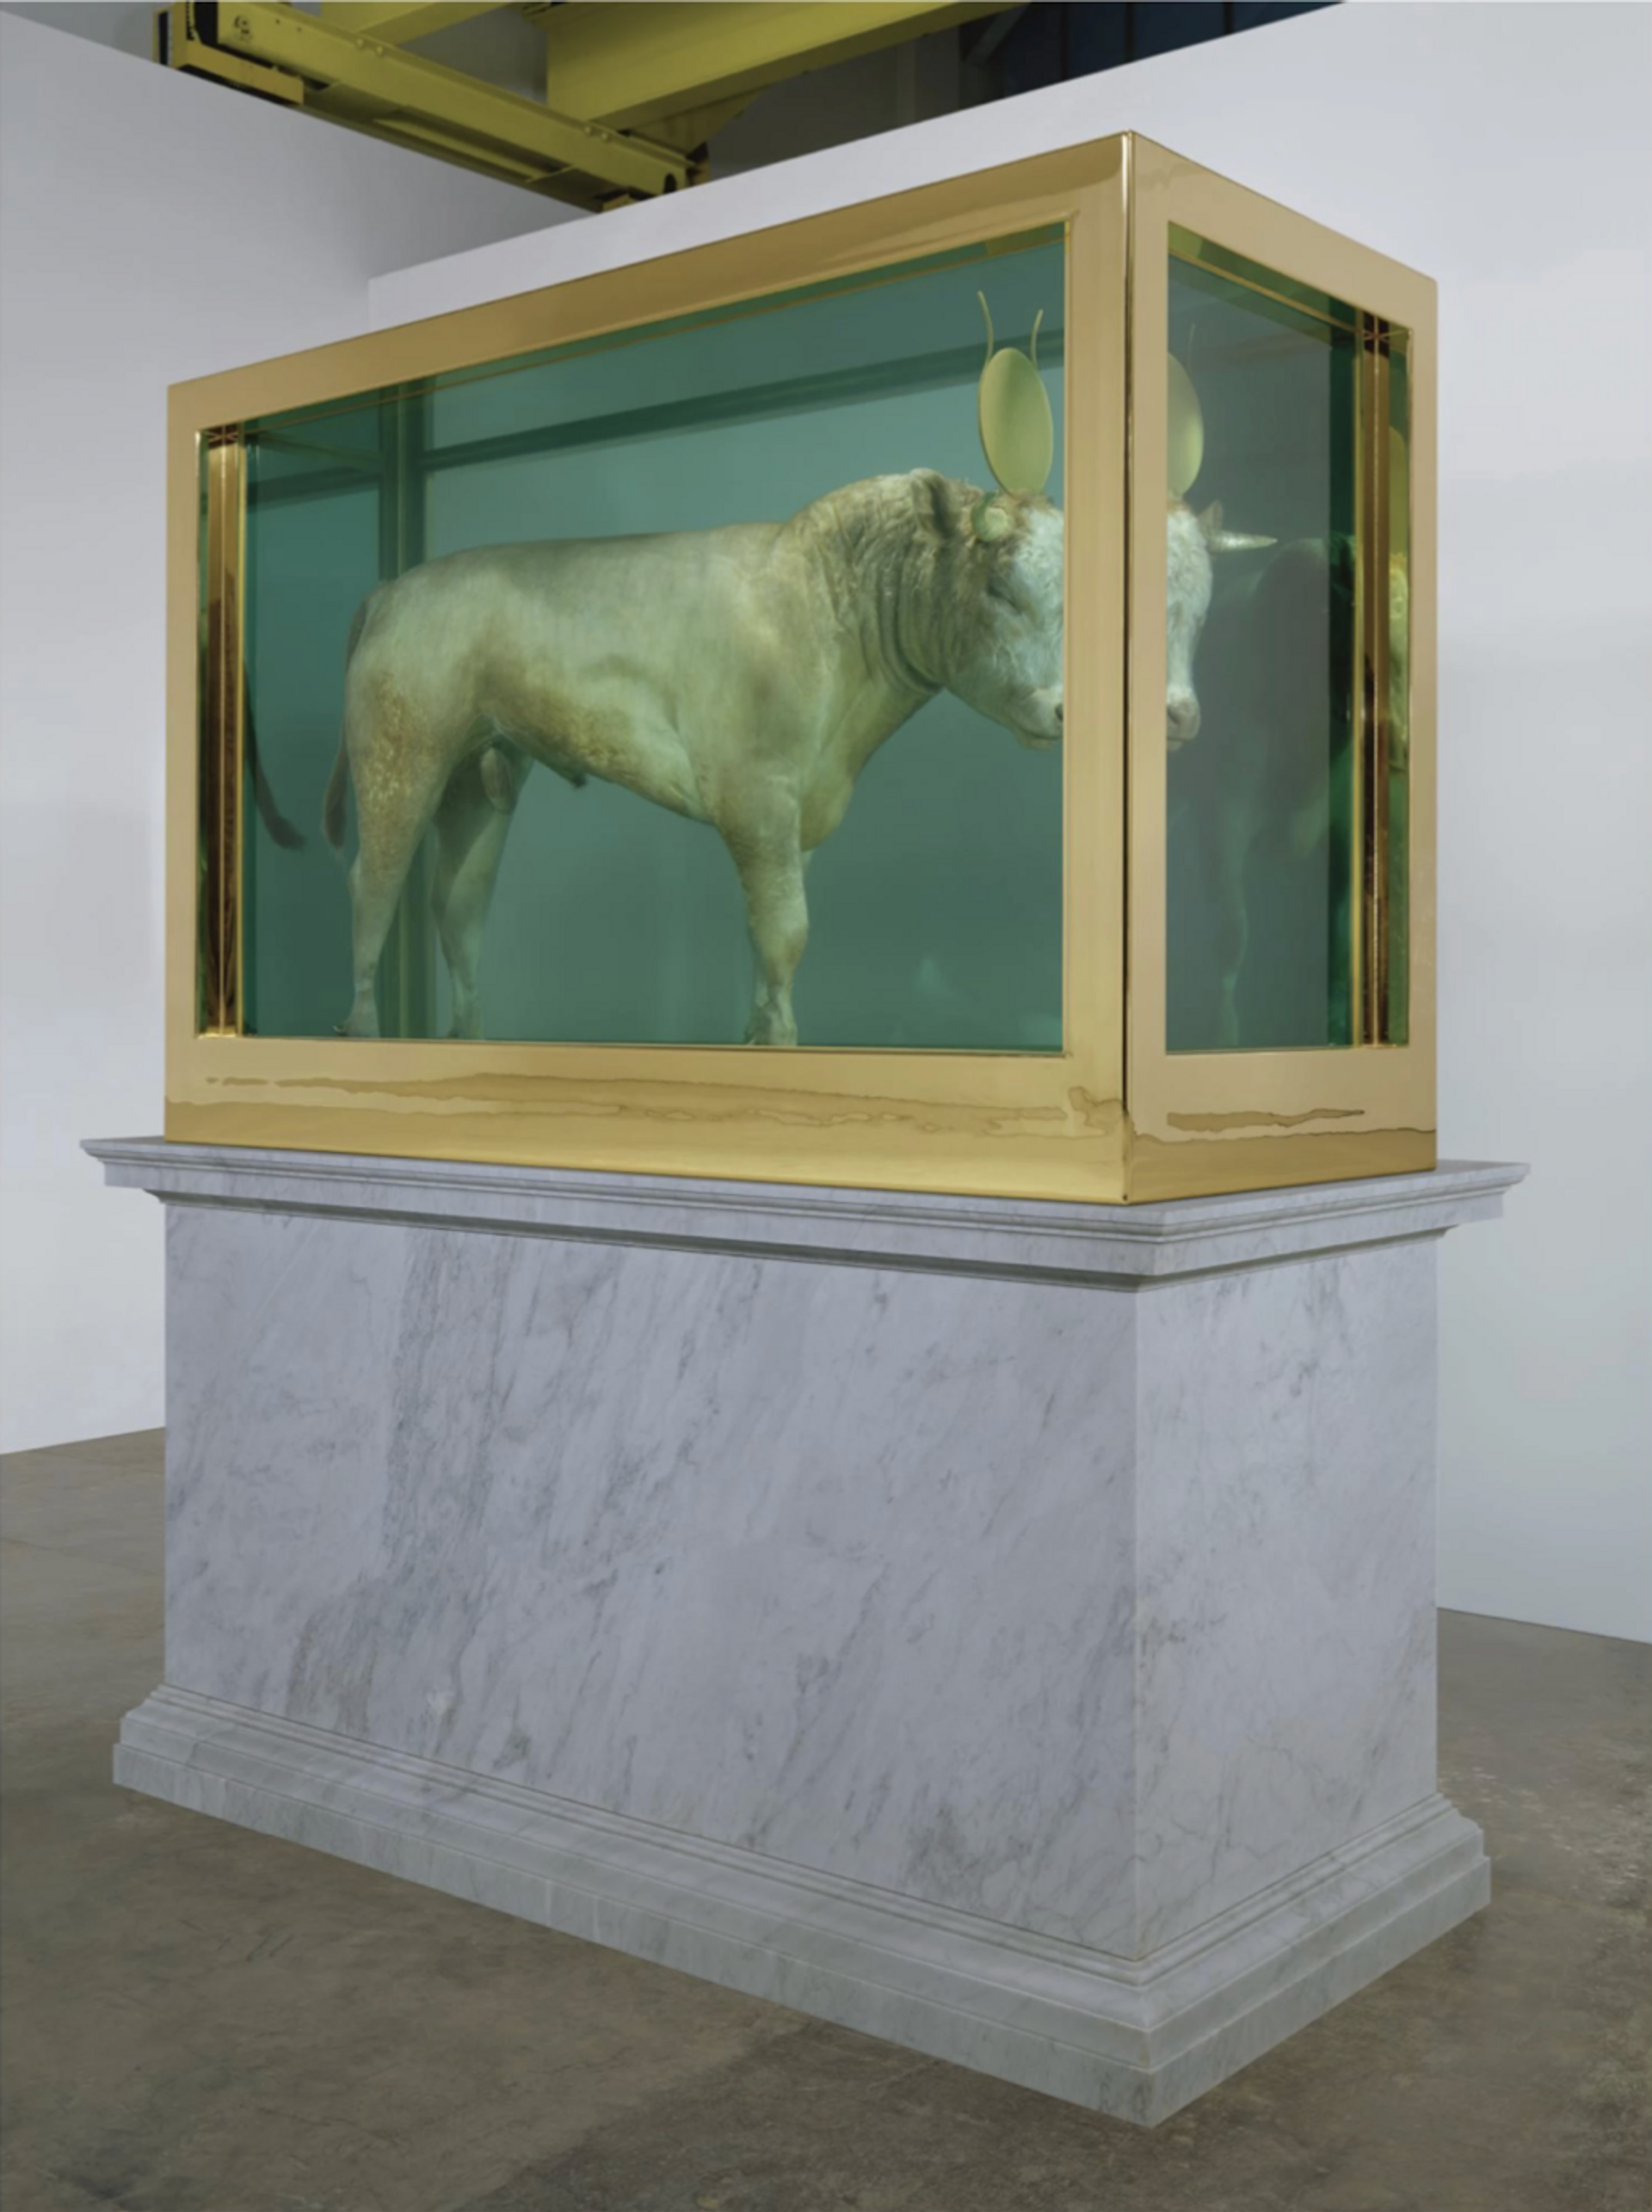 A calf suspended in formaldehyde in a gilt-gold edged box.